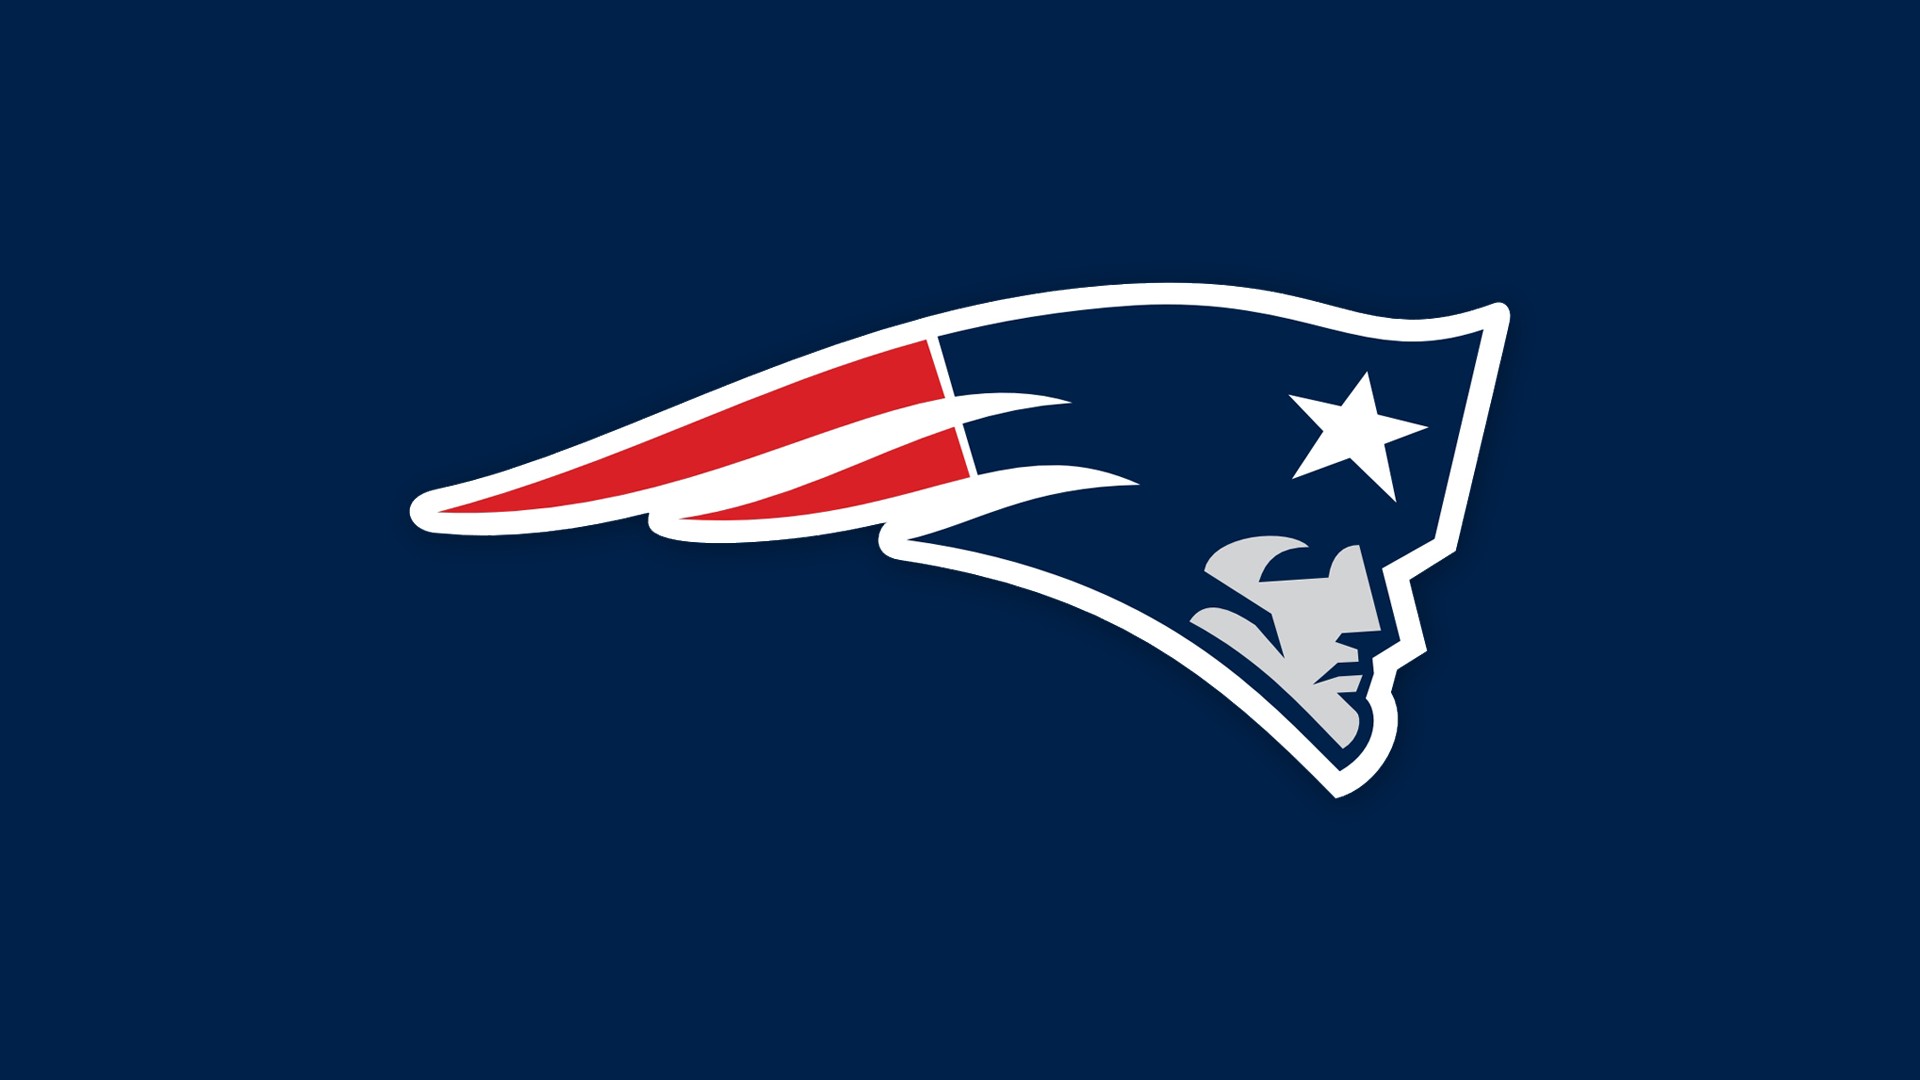 NE Patriots Backgrounds HD with resolution 1920x1080 pixel. You can make this wallpaper for your Mac or Windows Desktop Background, iPhone, Android or Tablet and another Smartphone device